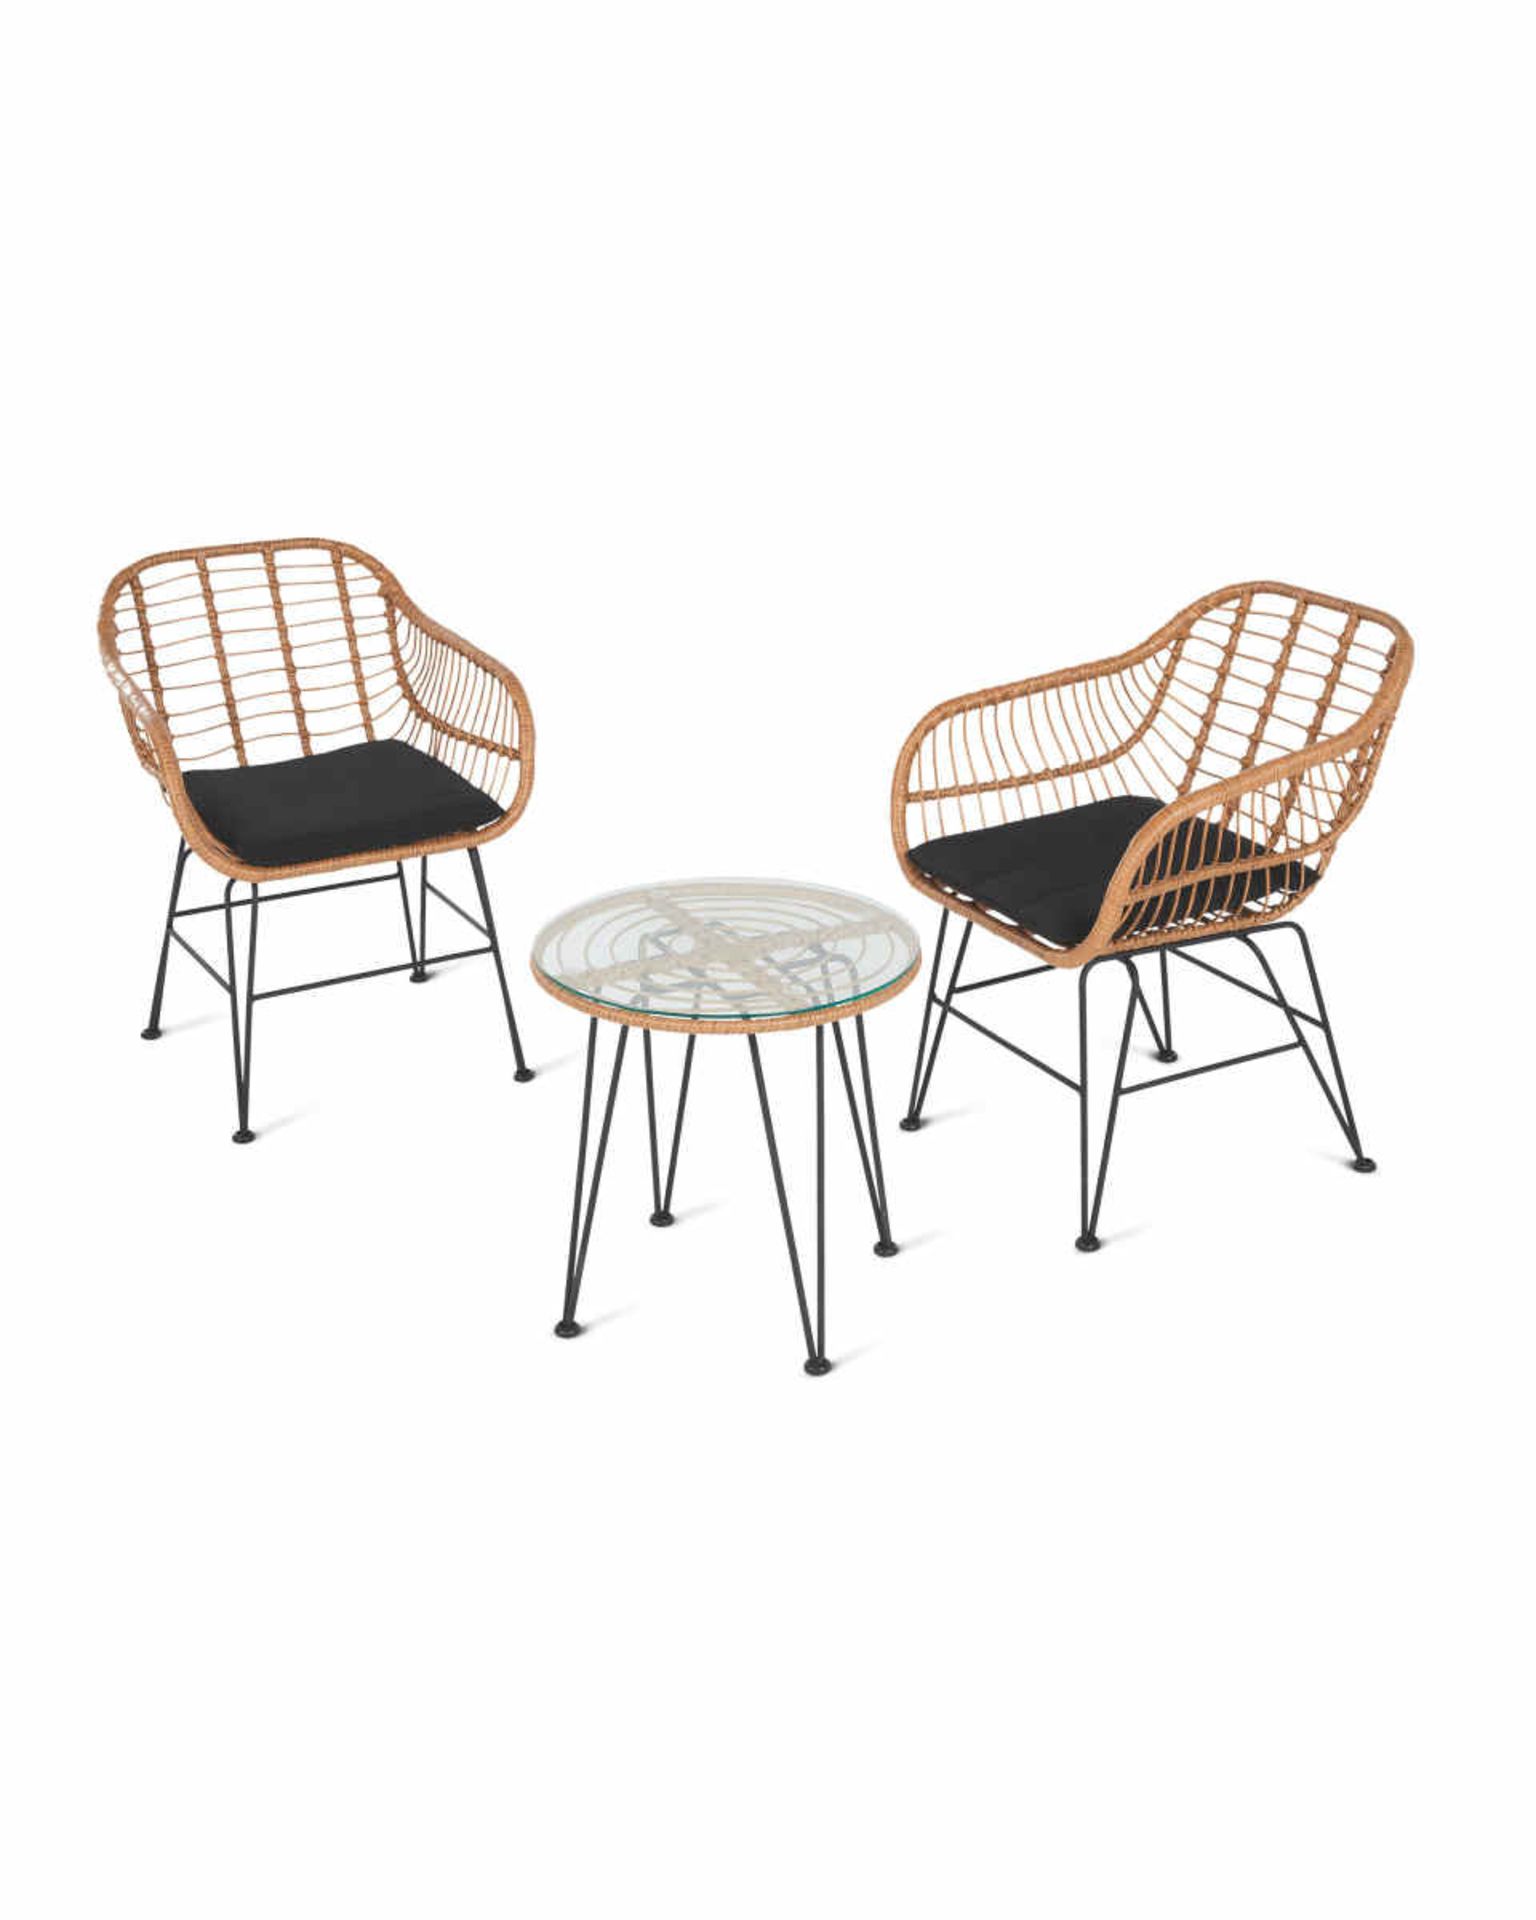 Bamboo Style Rattan Bistro Set. - H/ST. Enjoy your balcony view whilst relaxing on this stunning